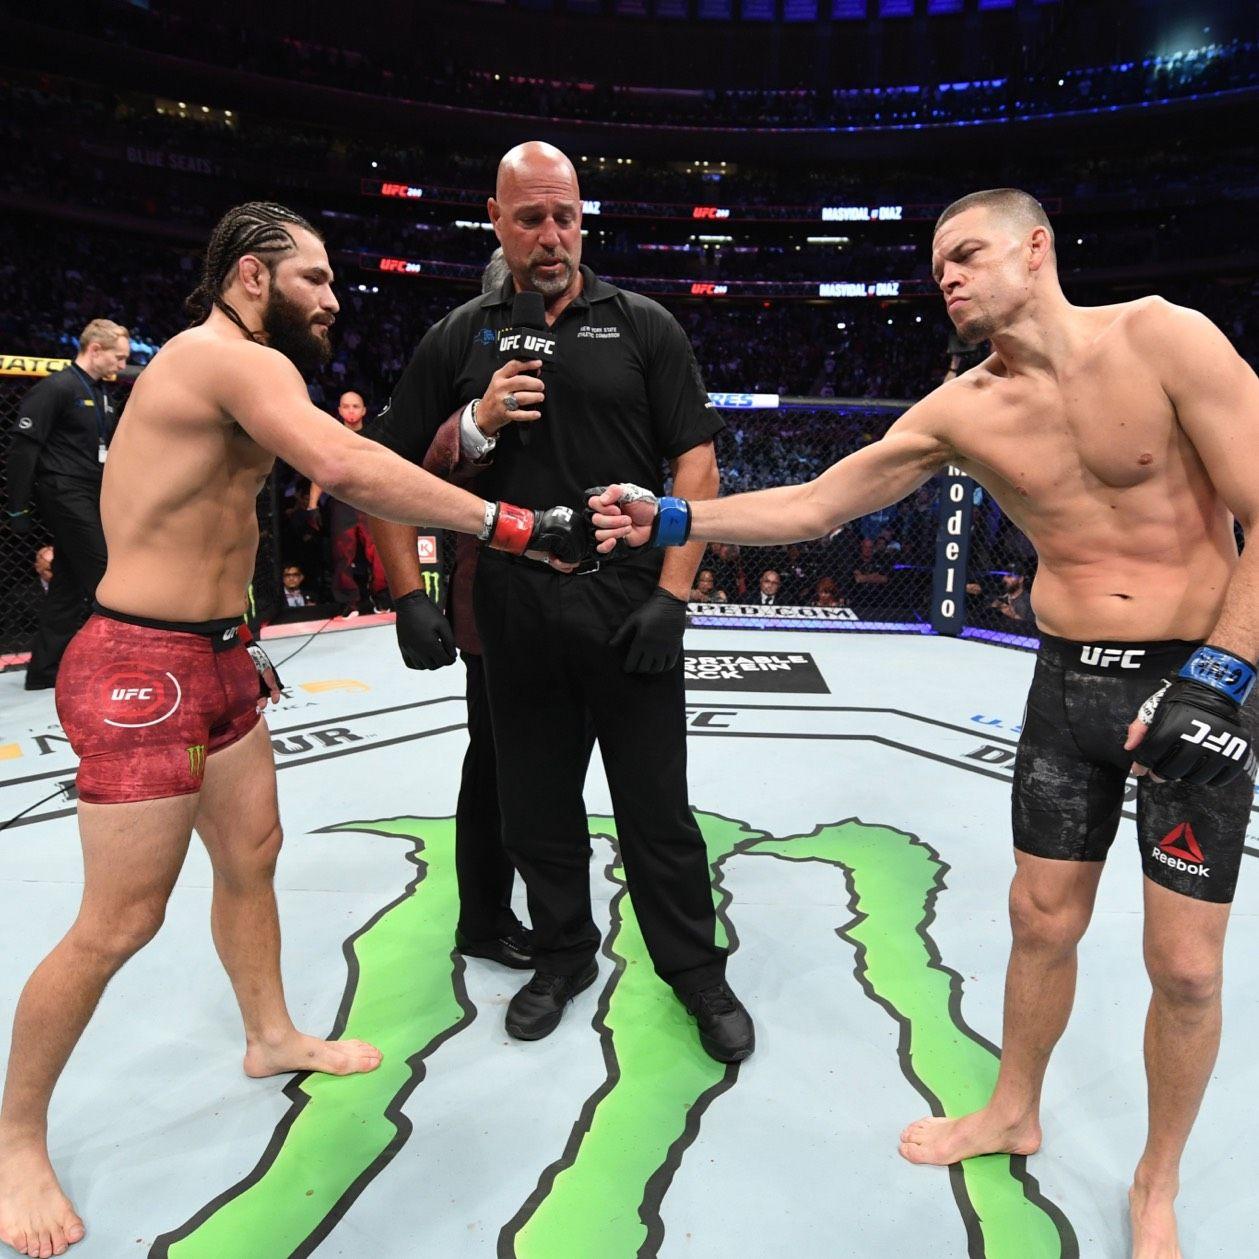 Jorge Masvidal went to Stockton to look for Nate Diaz